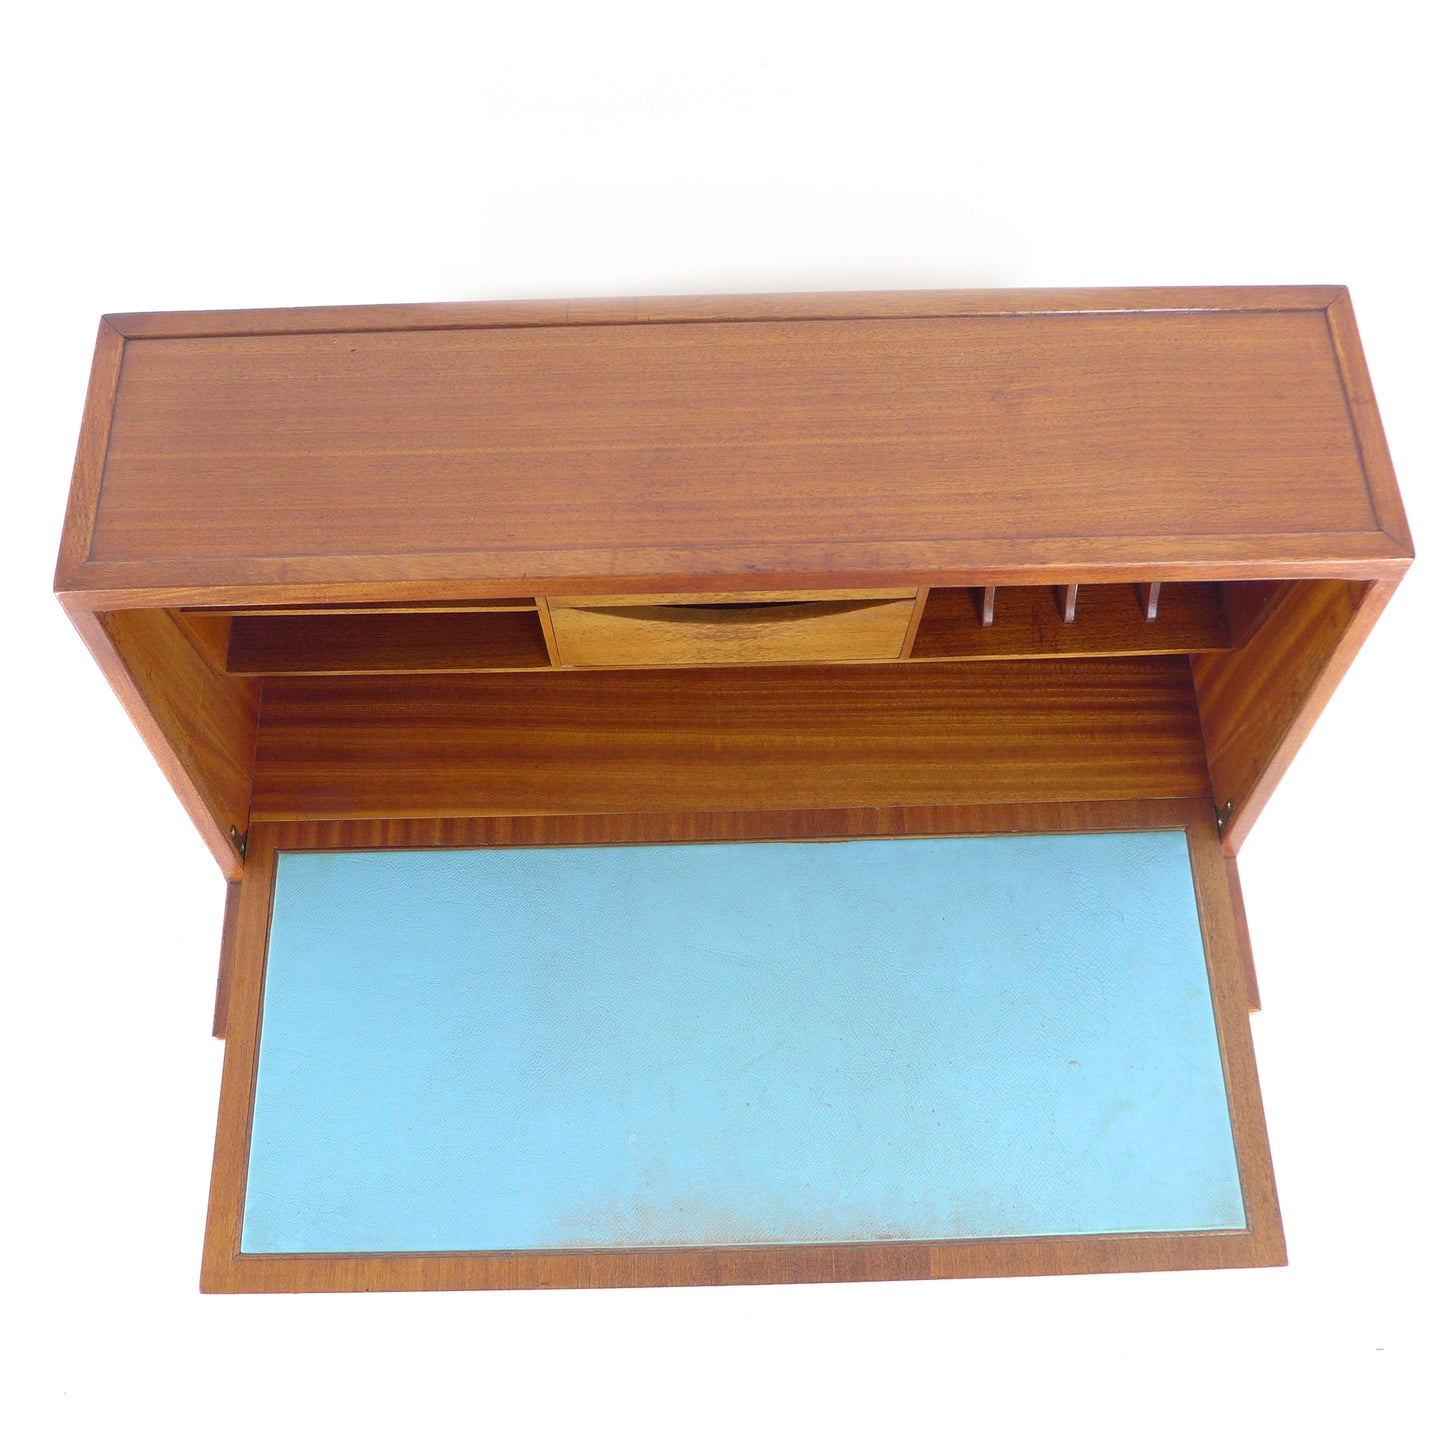 Mid Century Desk / Bureau with Leather Writing Slope - Possibly by Richard Hornby